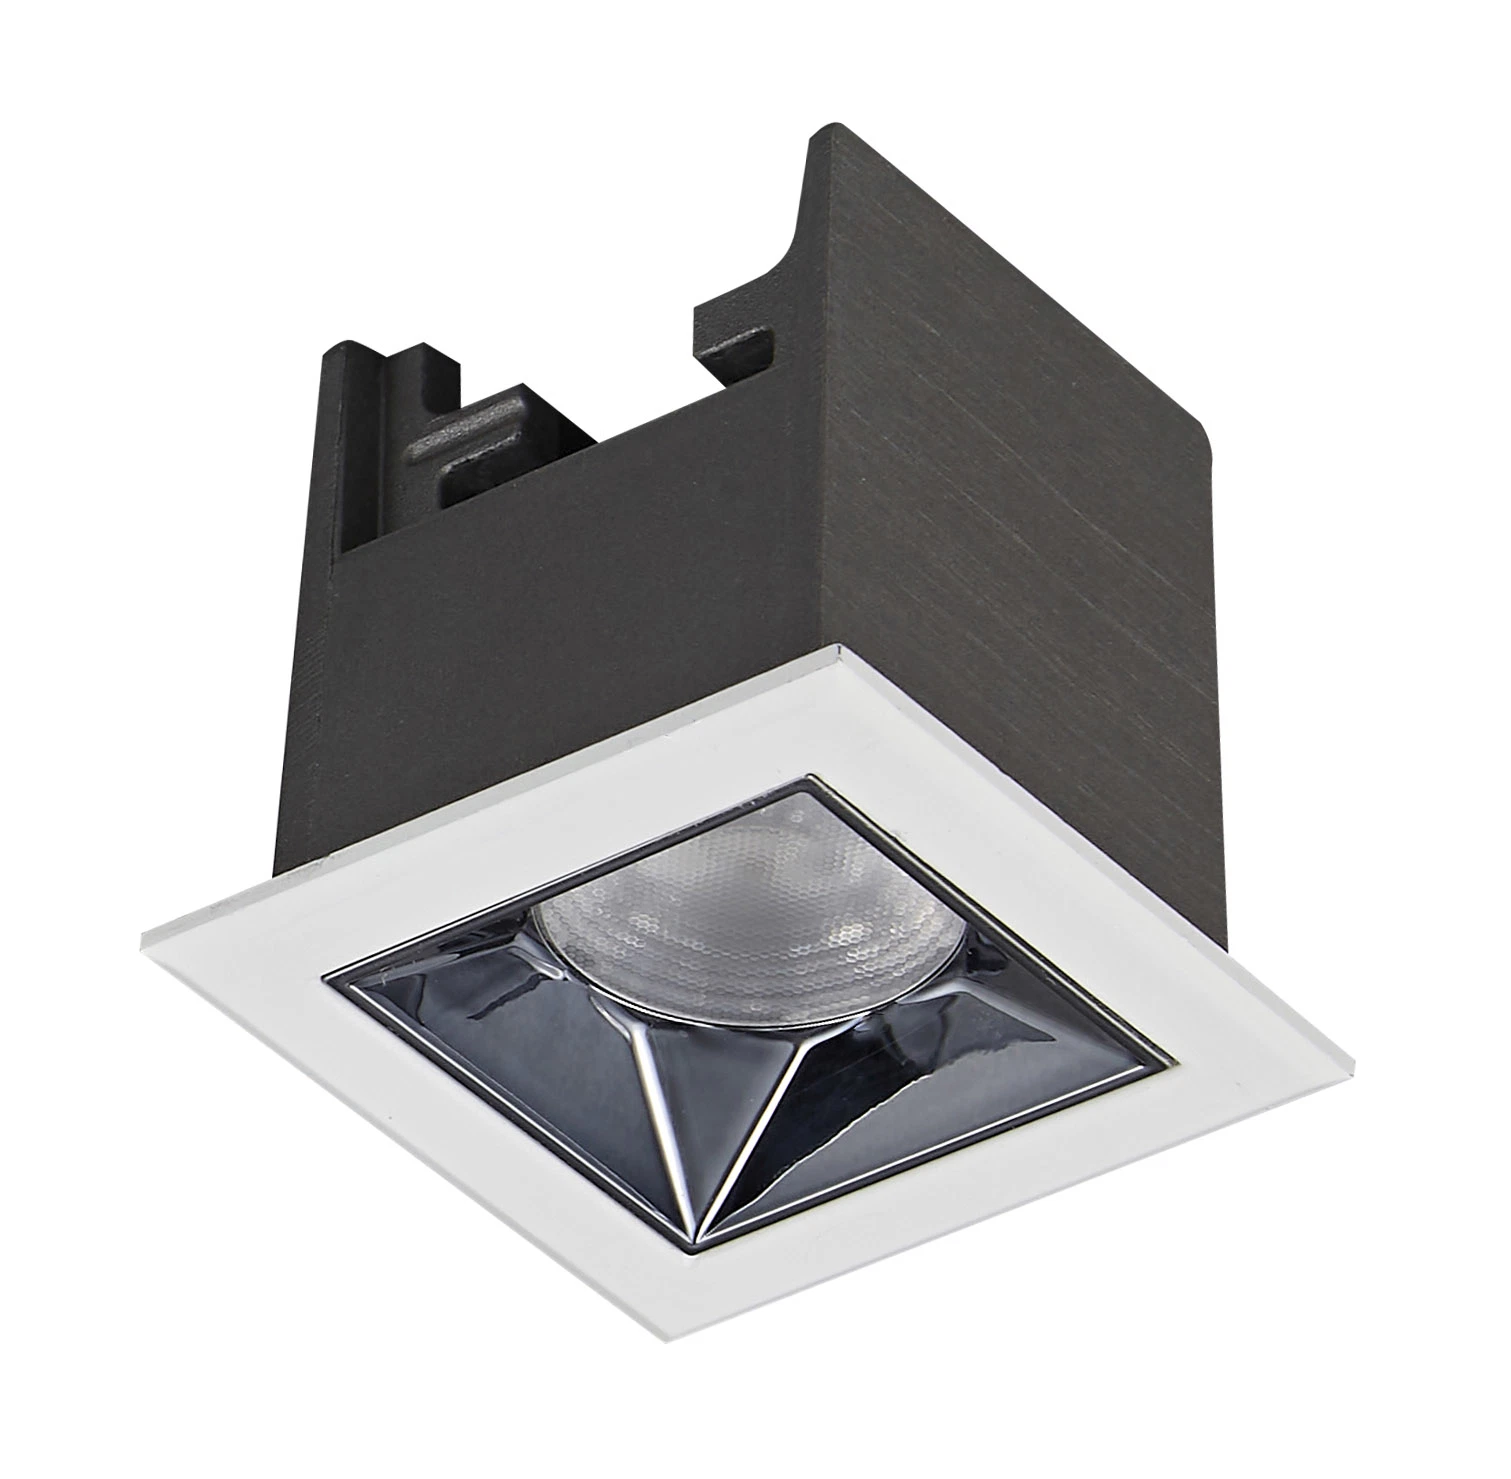 Ceiling Grille Recessed Light Fixture for Office Indoor Lighting